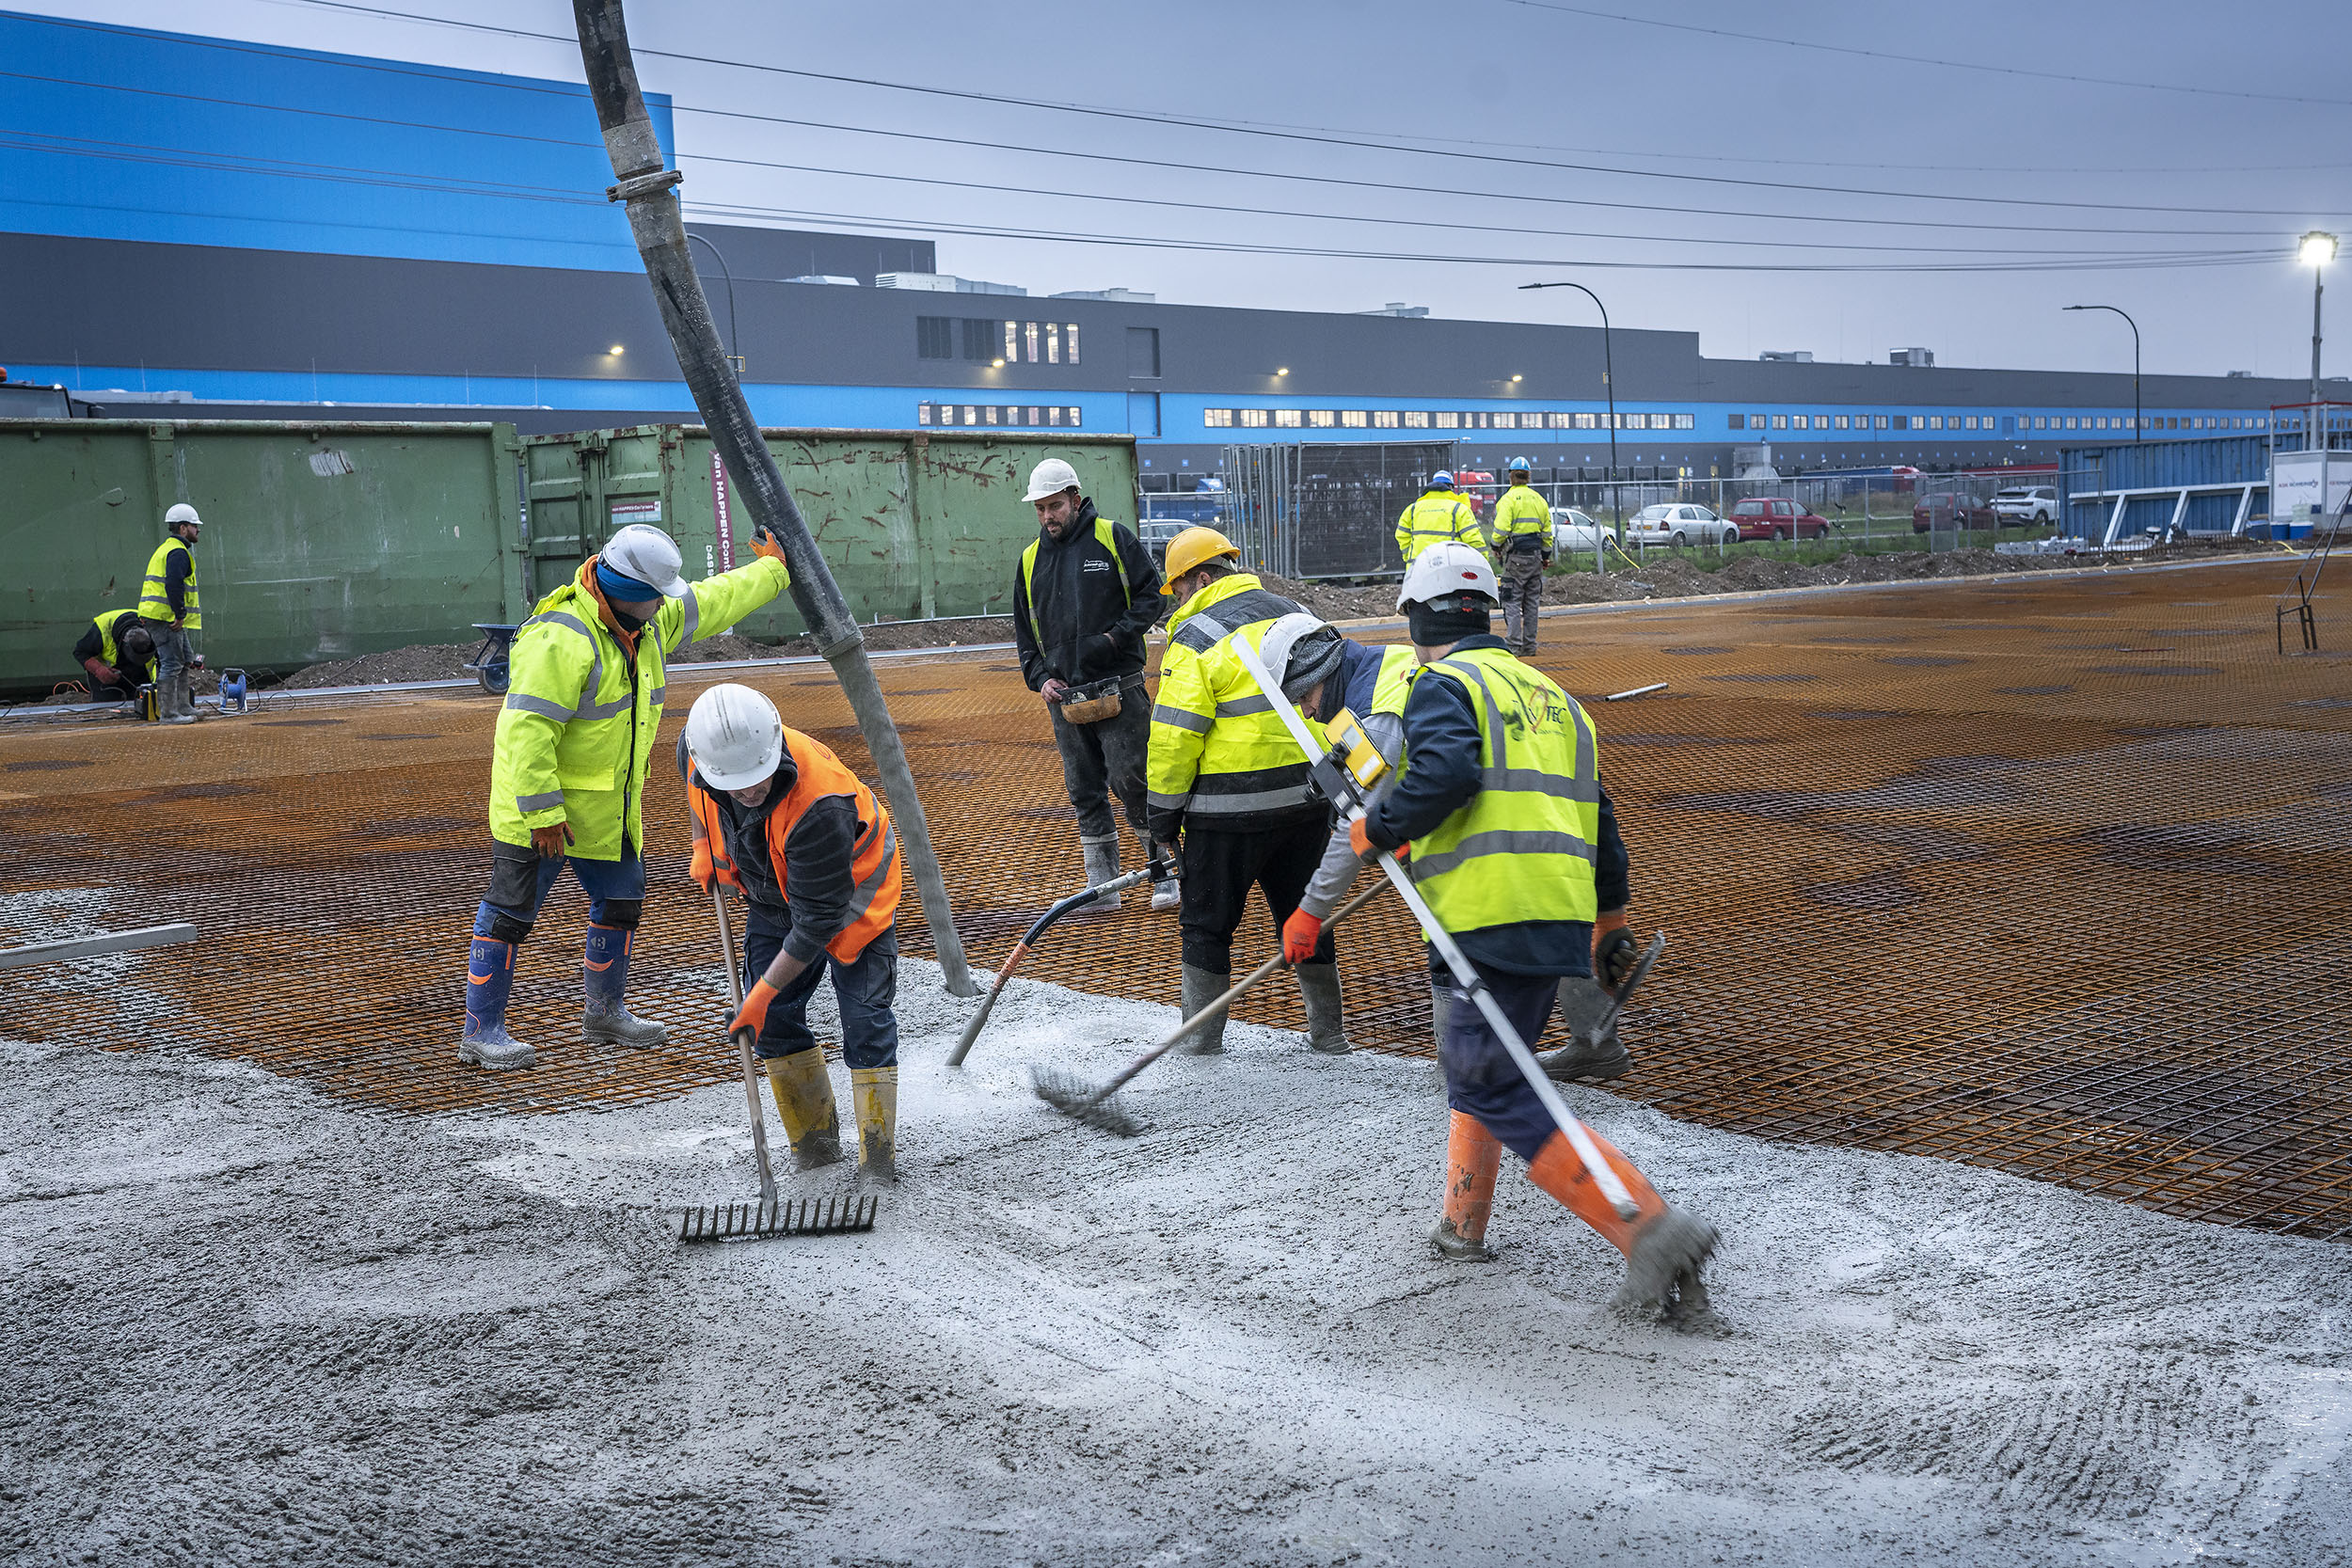 Self healing concrete pouring at Prologis Waalwijk DC2BC